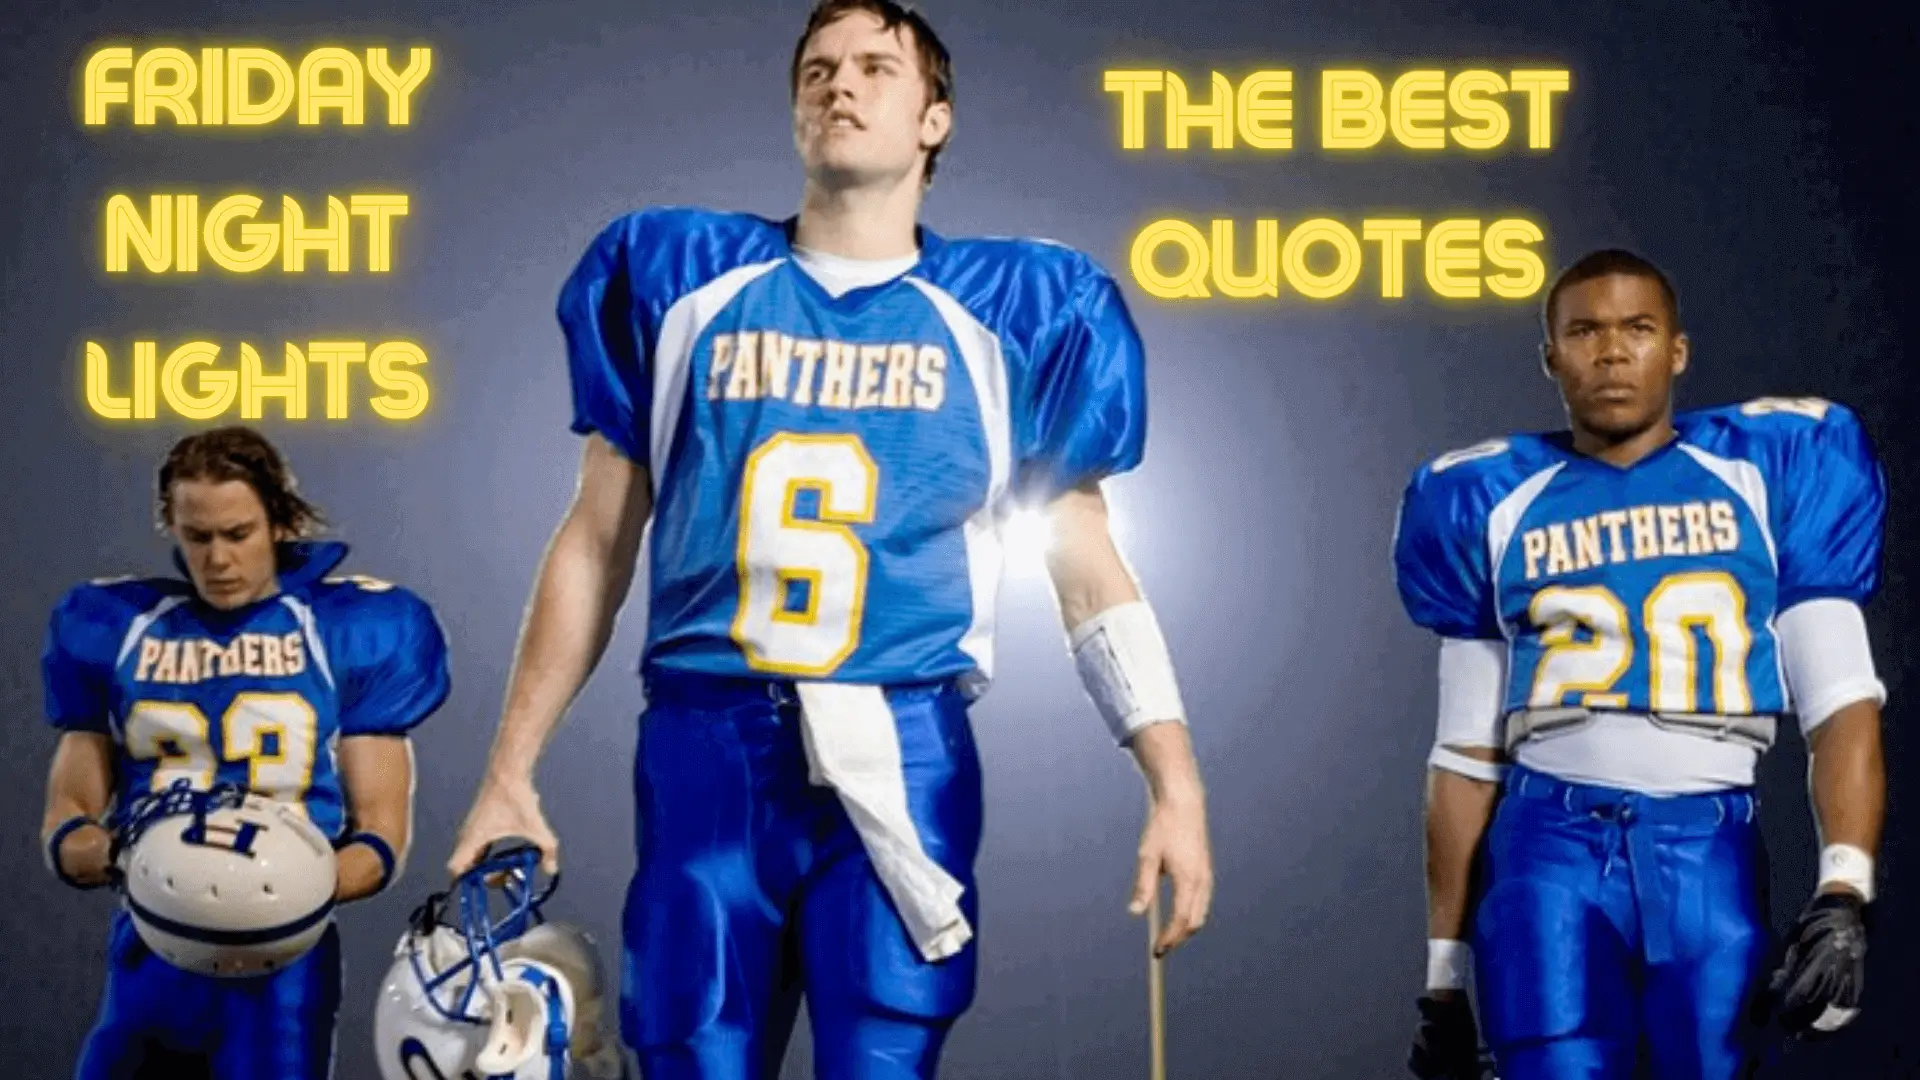 The best quotes from Friday Night Lights